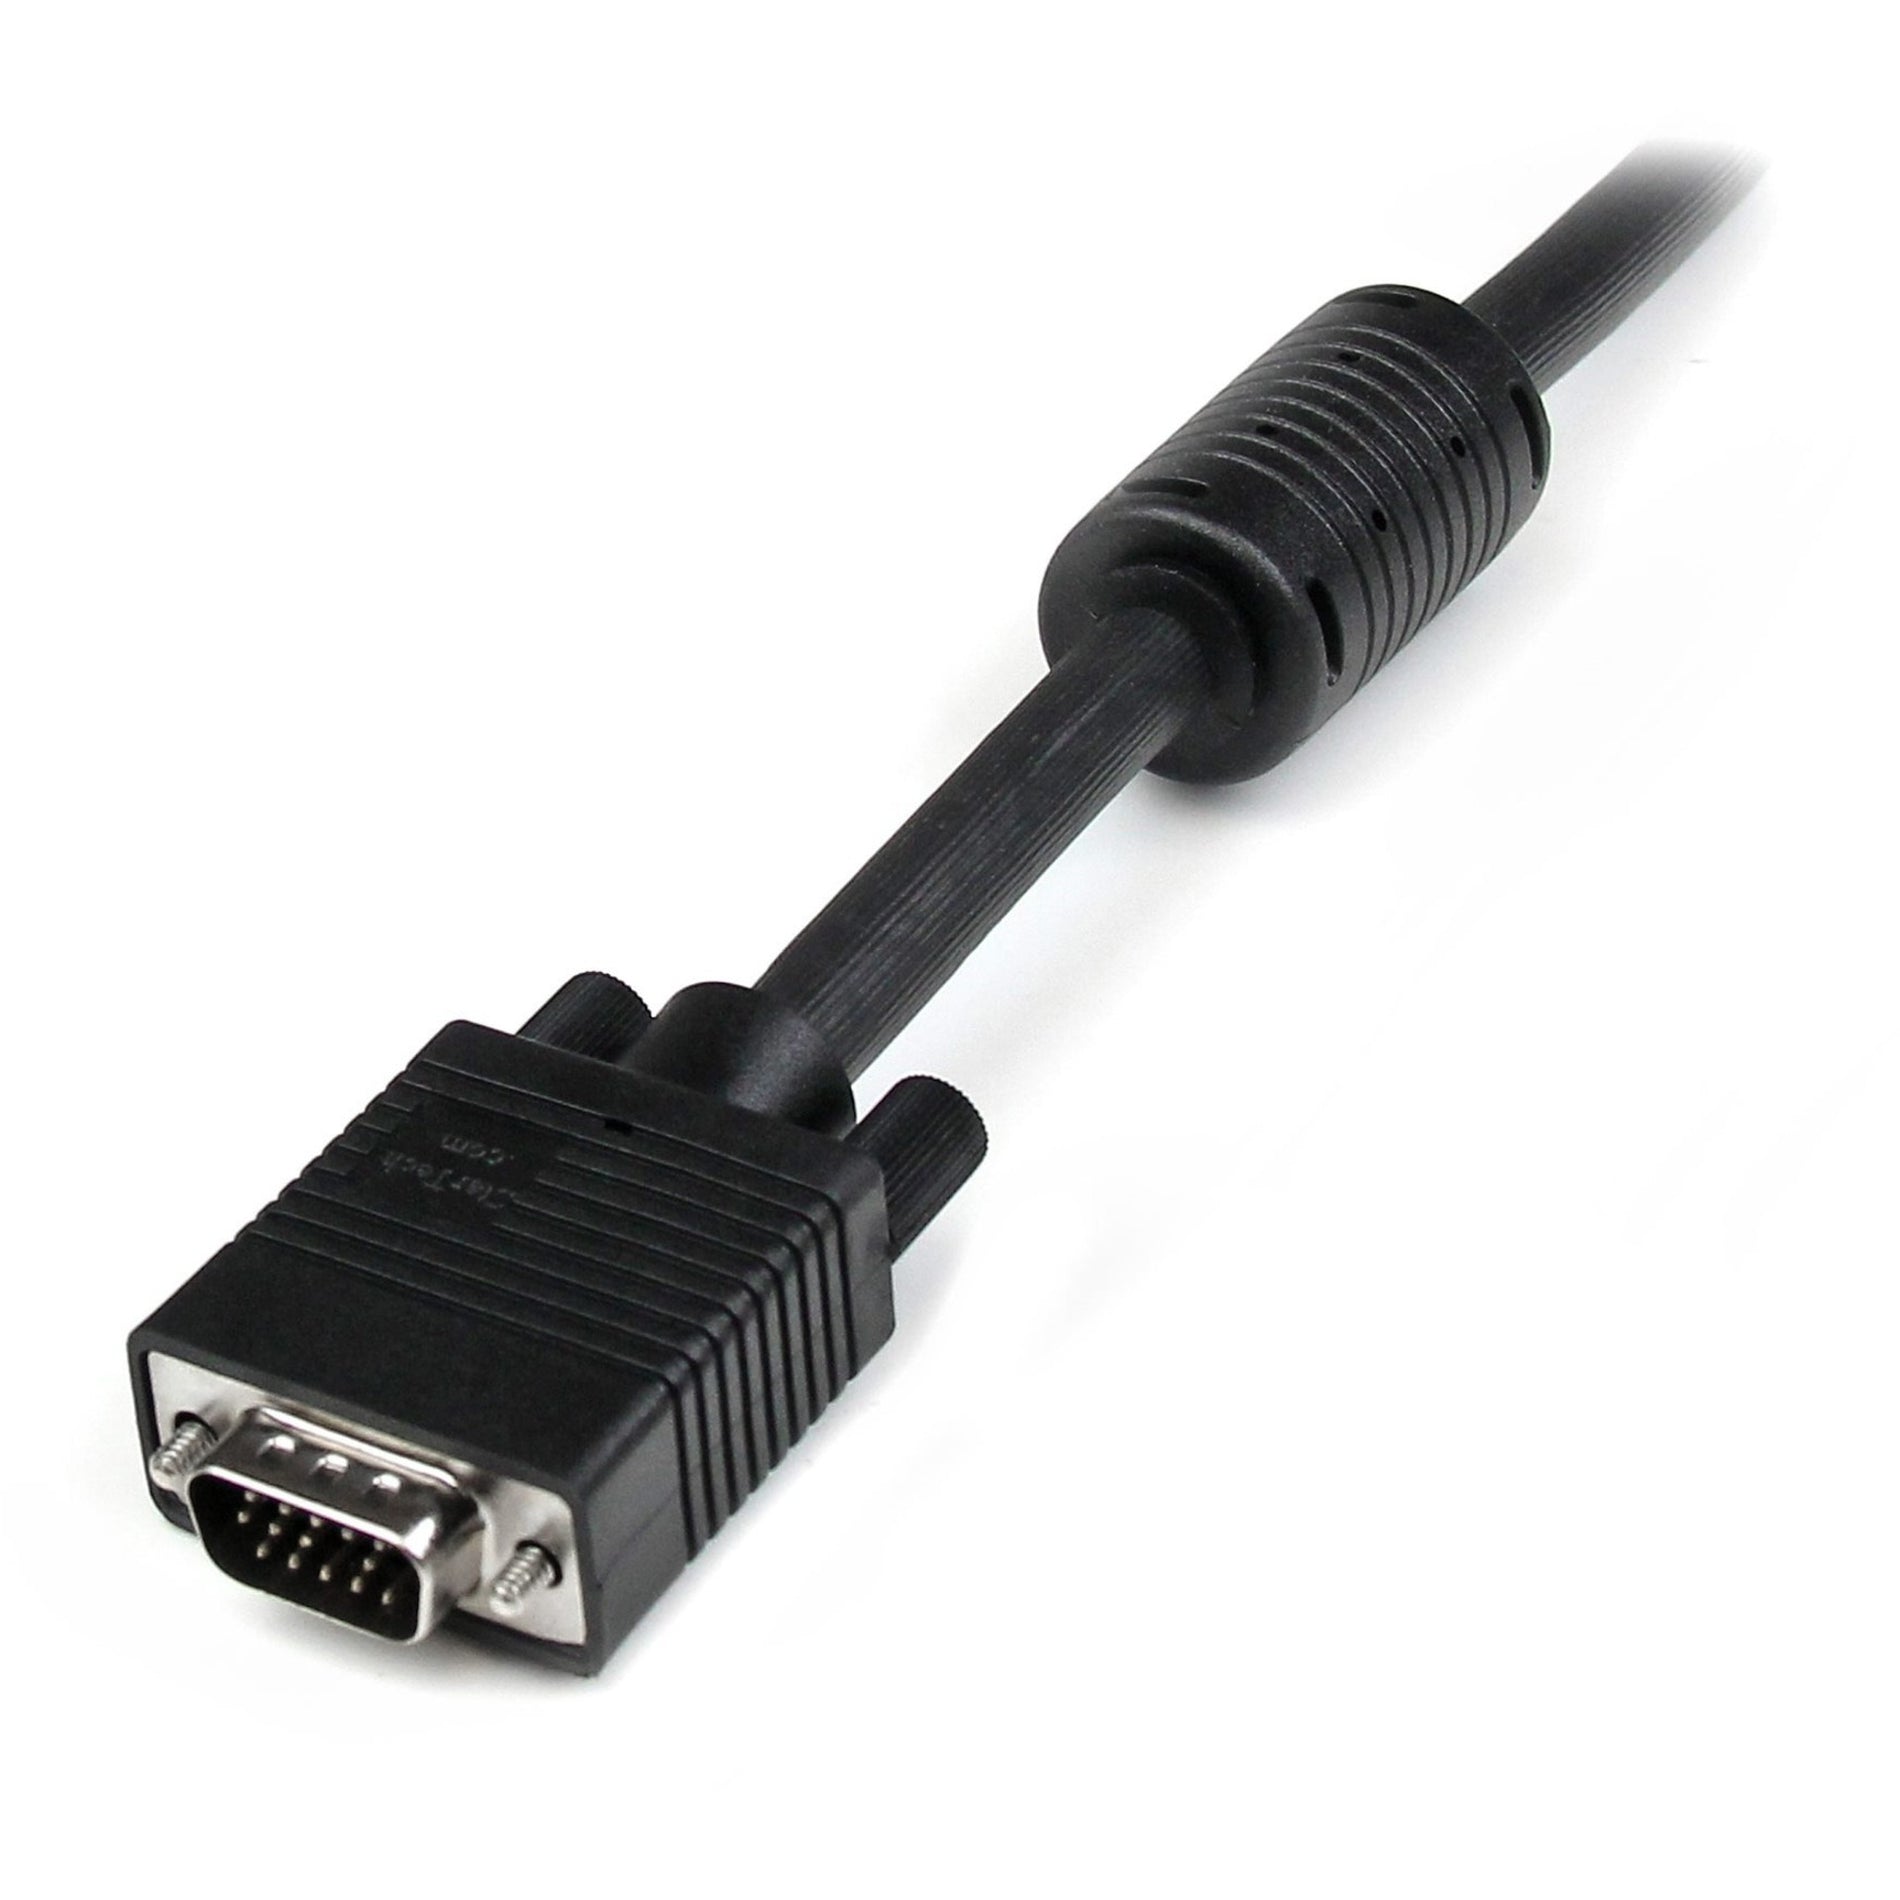 StarTech.com MXT101MMHQ1 1 ft Coax High Res Monitor VGA Cable HD15 M/M, Molded, EMI Protection, Strain Relief, 1920 x 1200 Supported Resolution